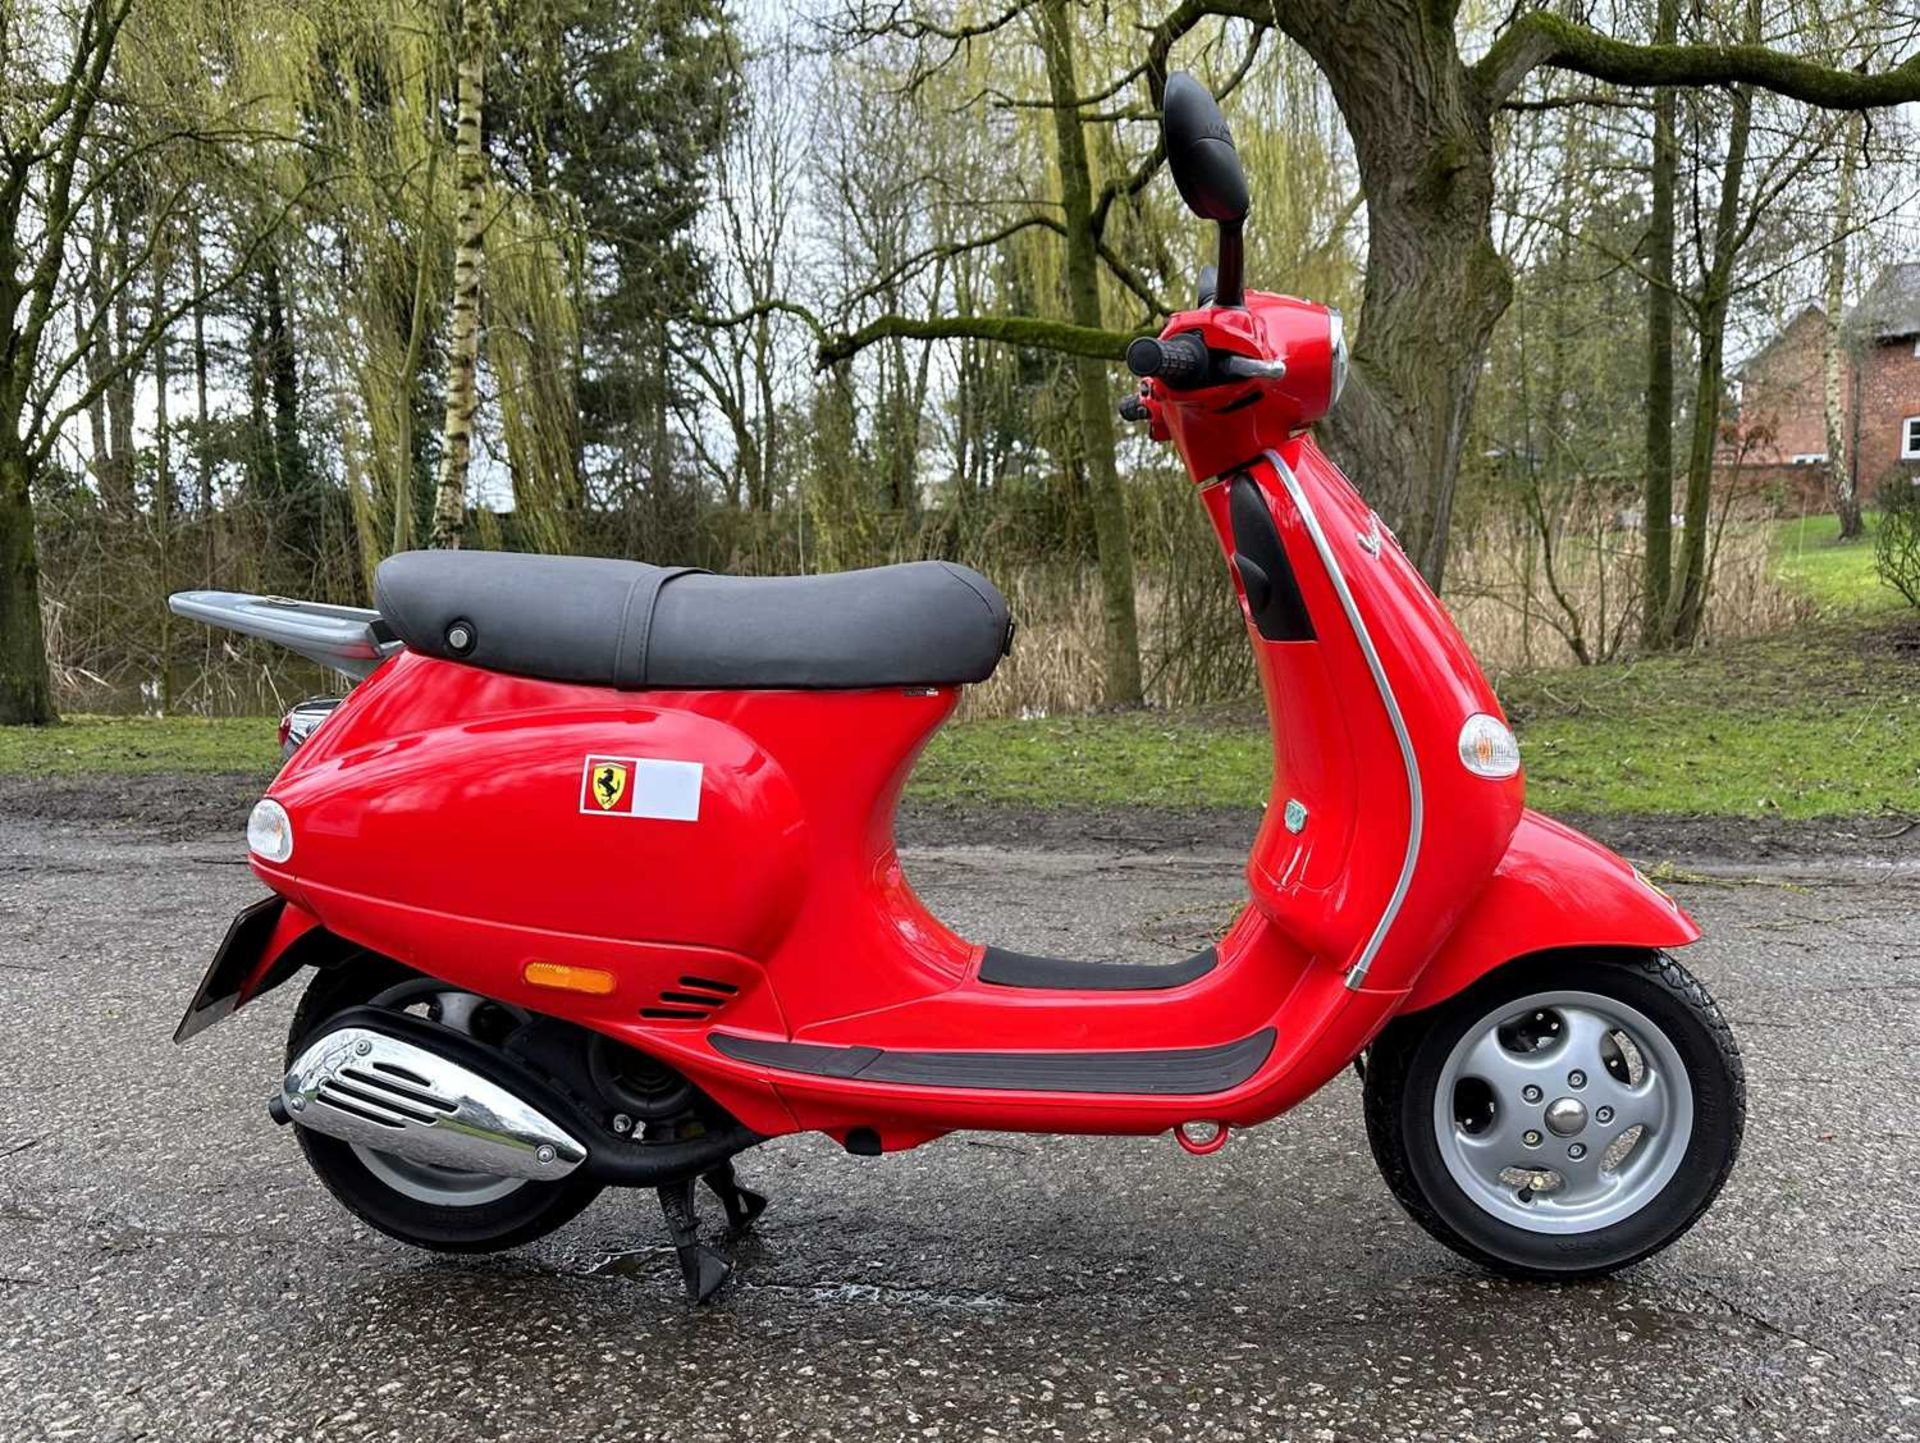 2003 Vespa ET4 125cc Pit Bike Believed to be one of 20 for the use of the Schumacher Scuderia Ferrar